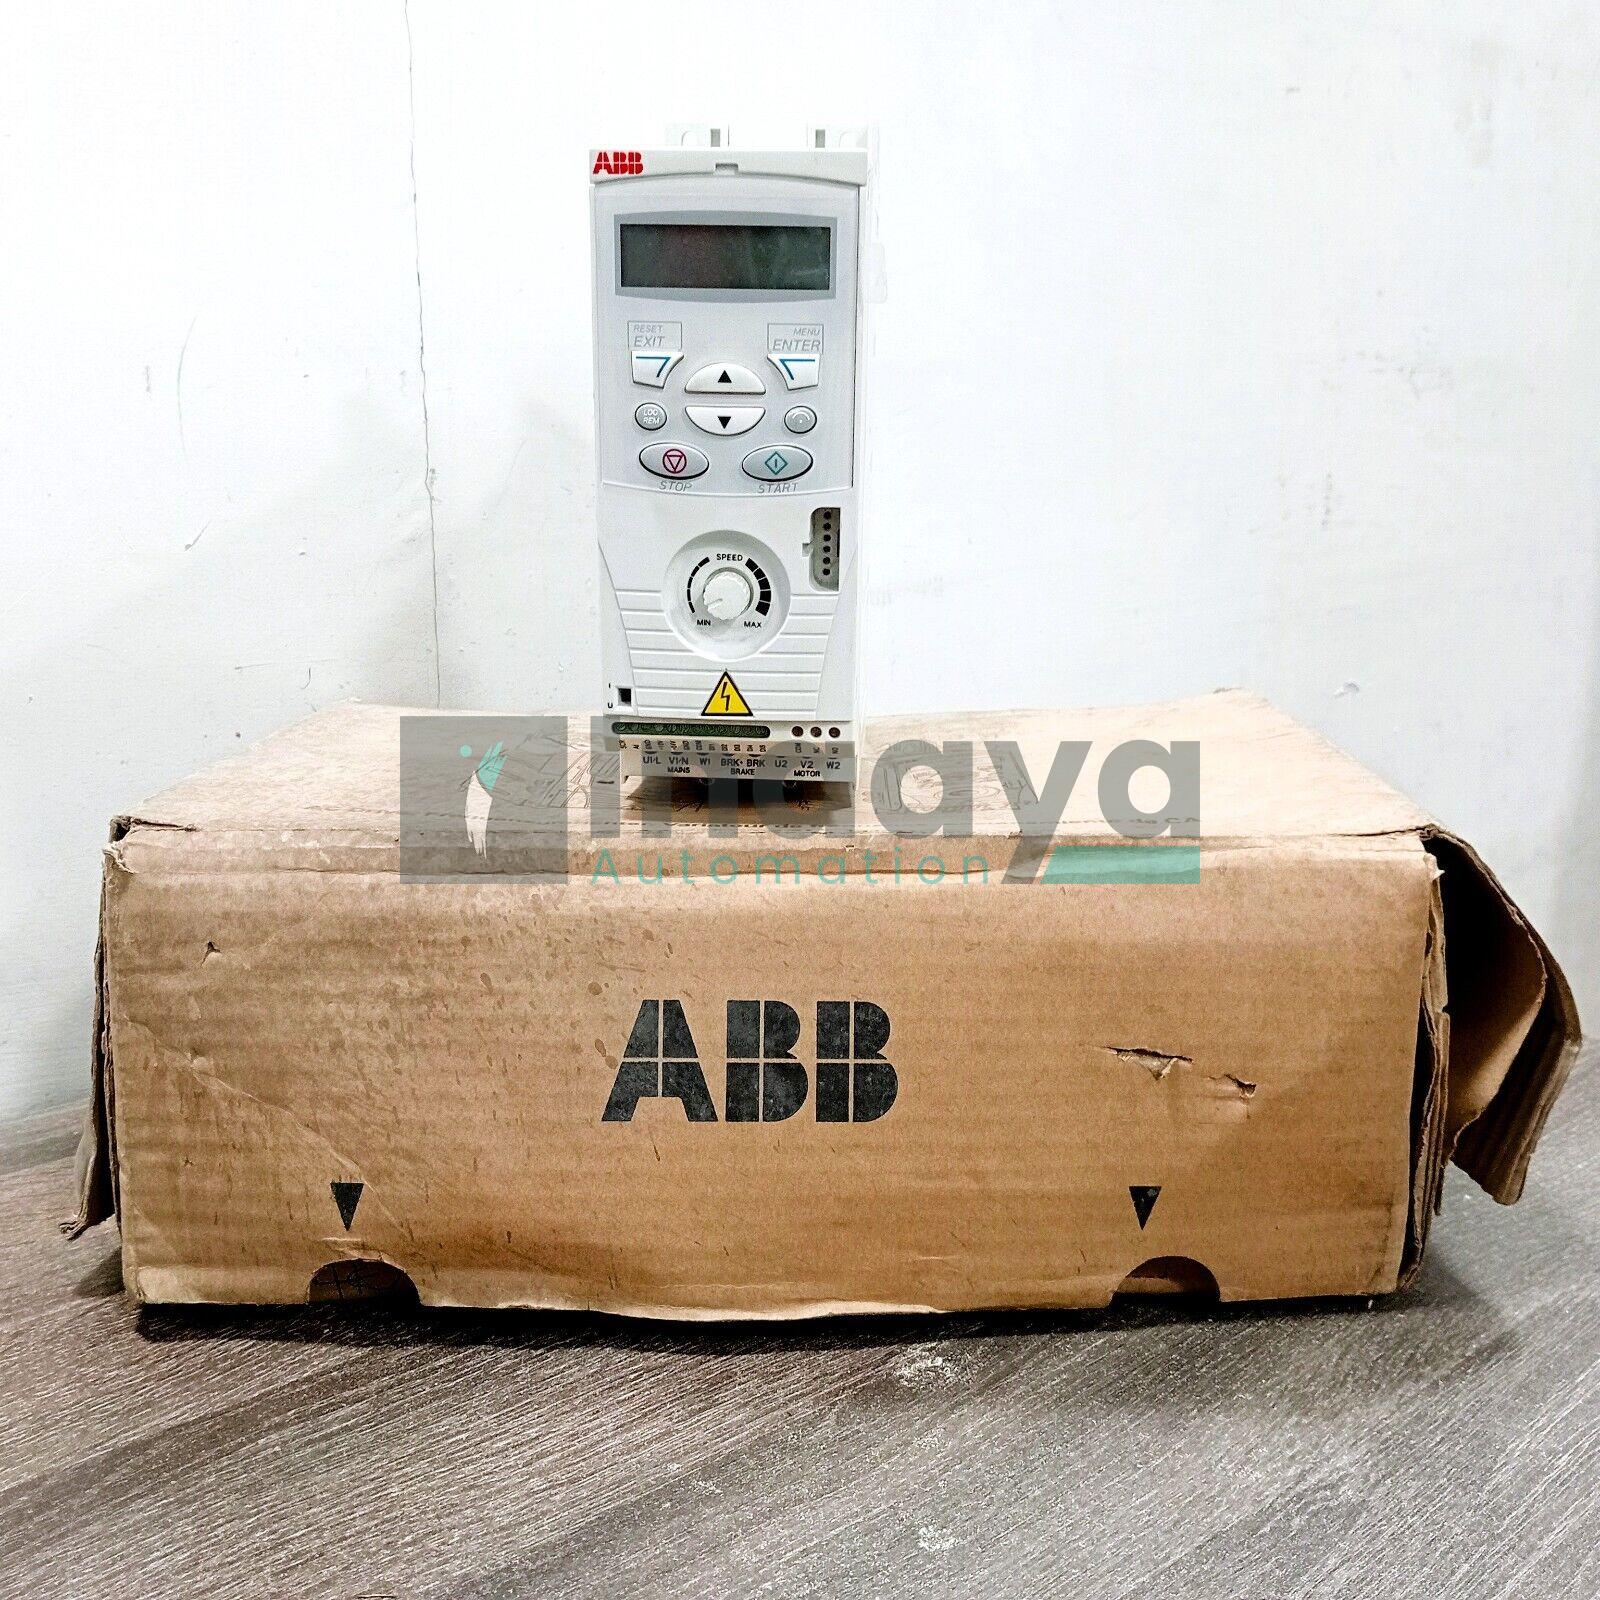 ABB ACS150-03E-01A9-4 AC DRIVE 0.55 KW / 0.75 HP TYPE ACS150 FREQUENCY CONVERTER FRAME SIZE R0 3 PHASE 380-480 VAC INPUT 50/60 HZ 3.6 AMP 0-500 HZ OUTPUT 1.9 AMP  